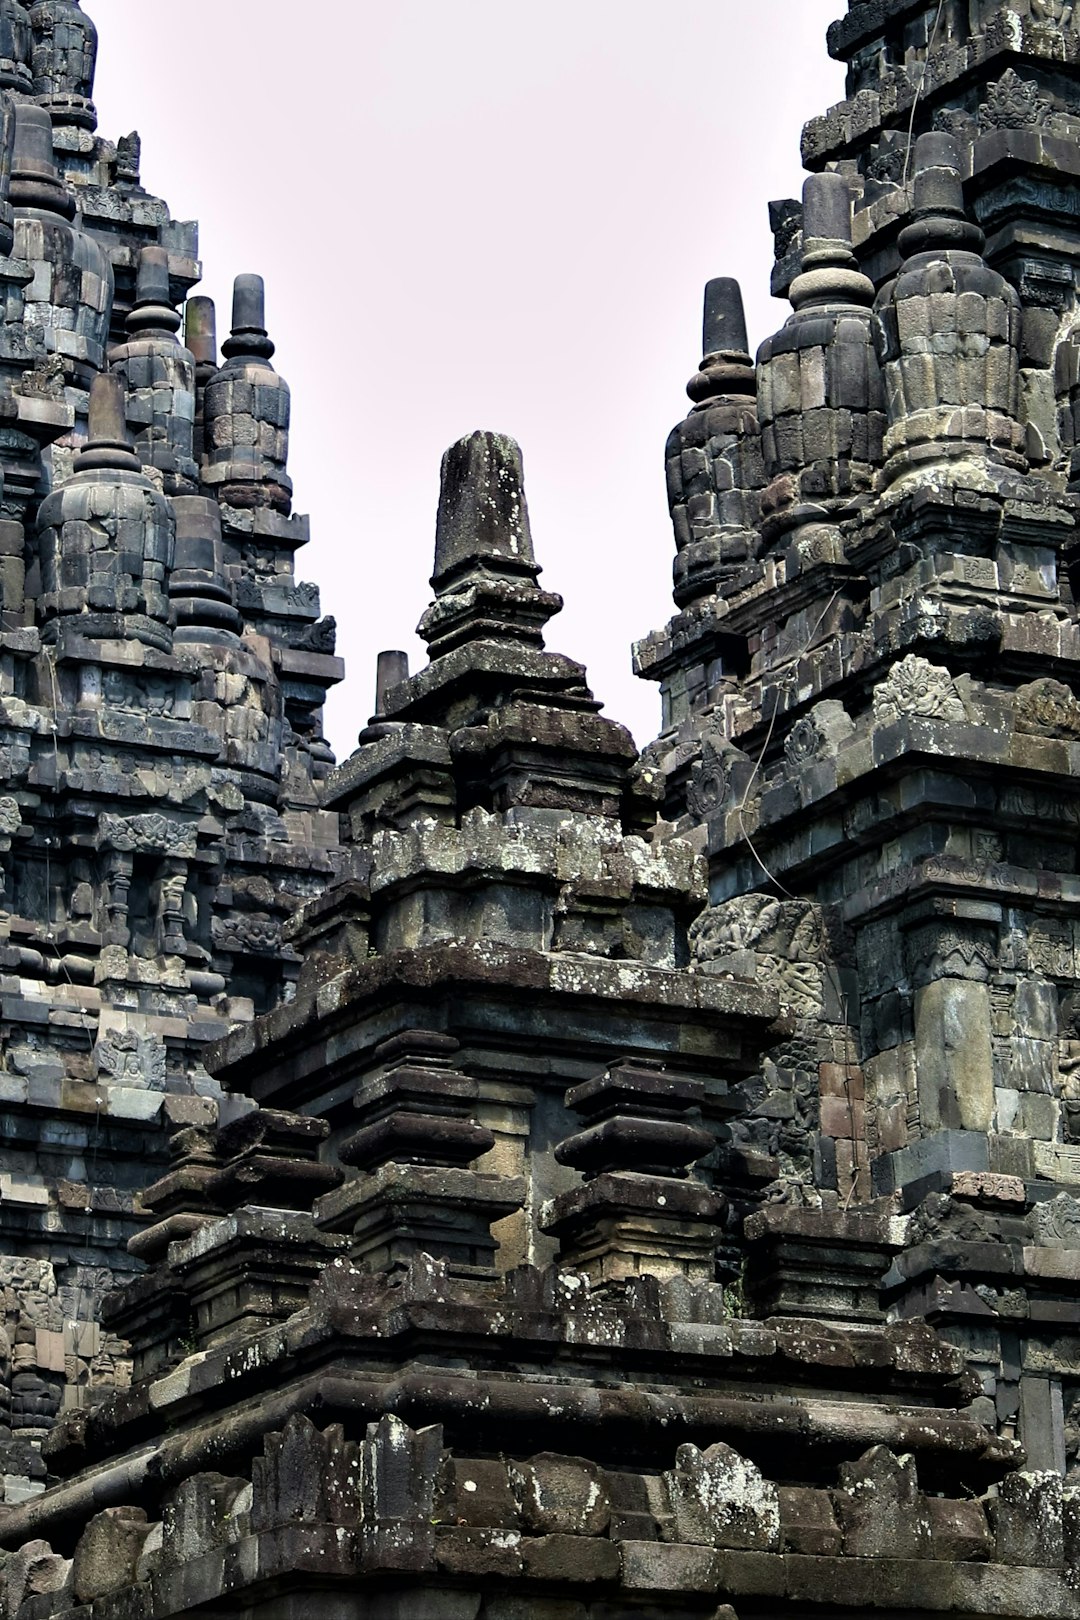 Have You Been to Some of These Most Magnificent Temples in Indonesia?